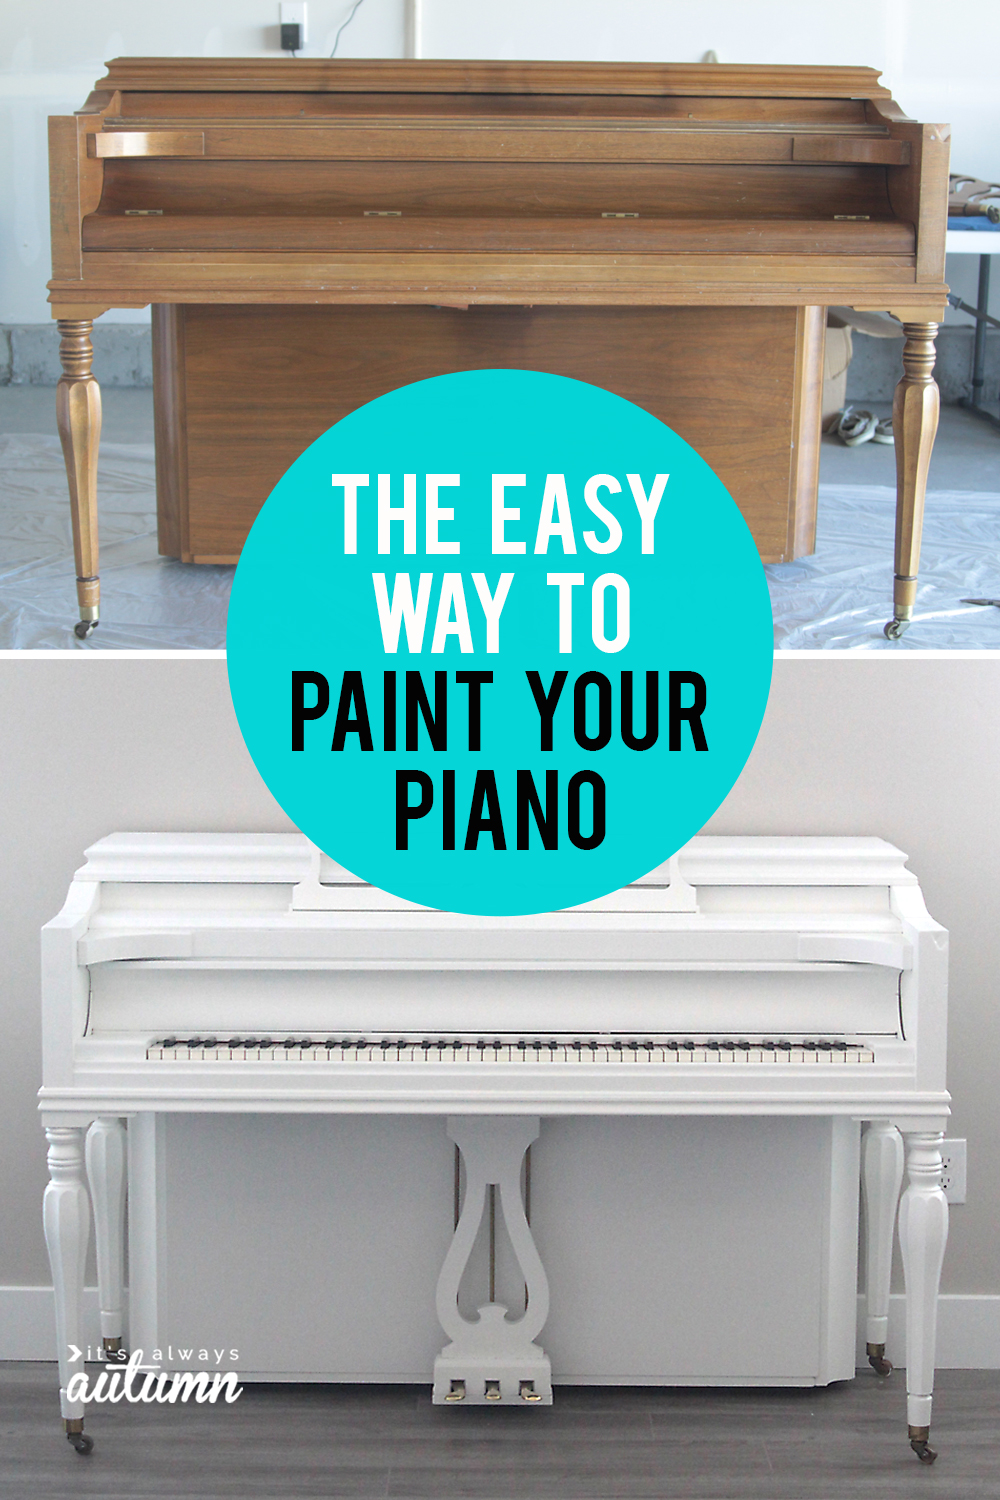 How to paint your piano - the easy way! Step by step instructions for painting a piano to match your decor.